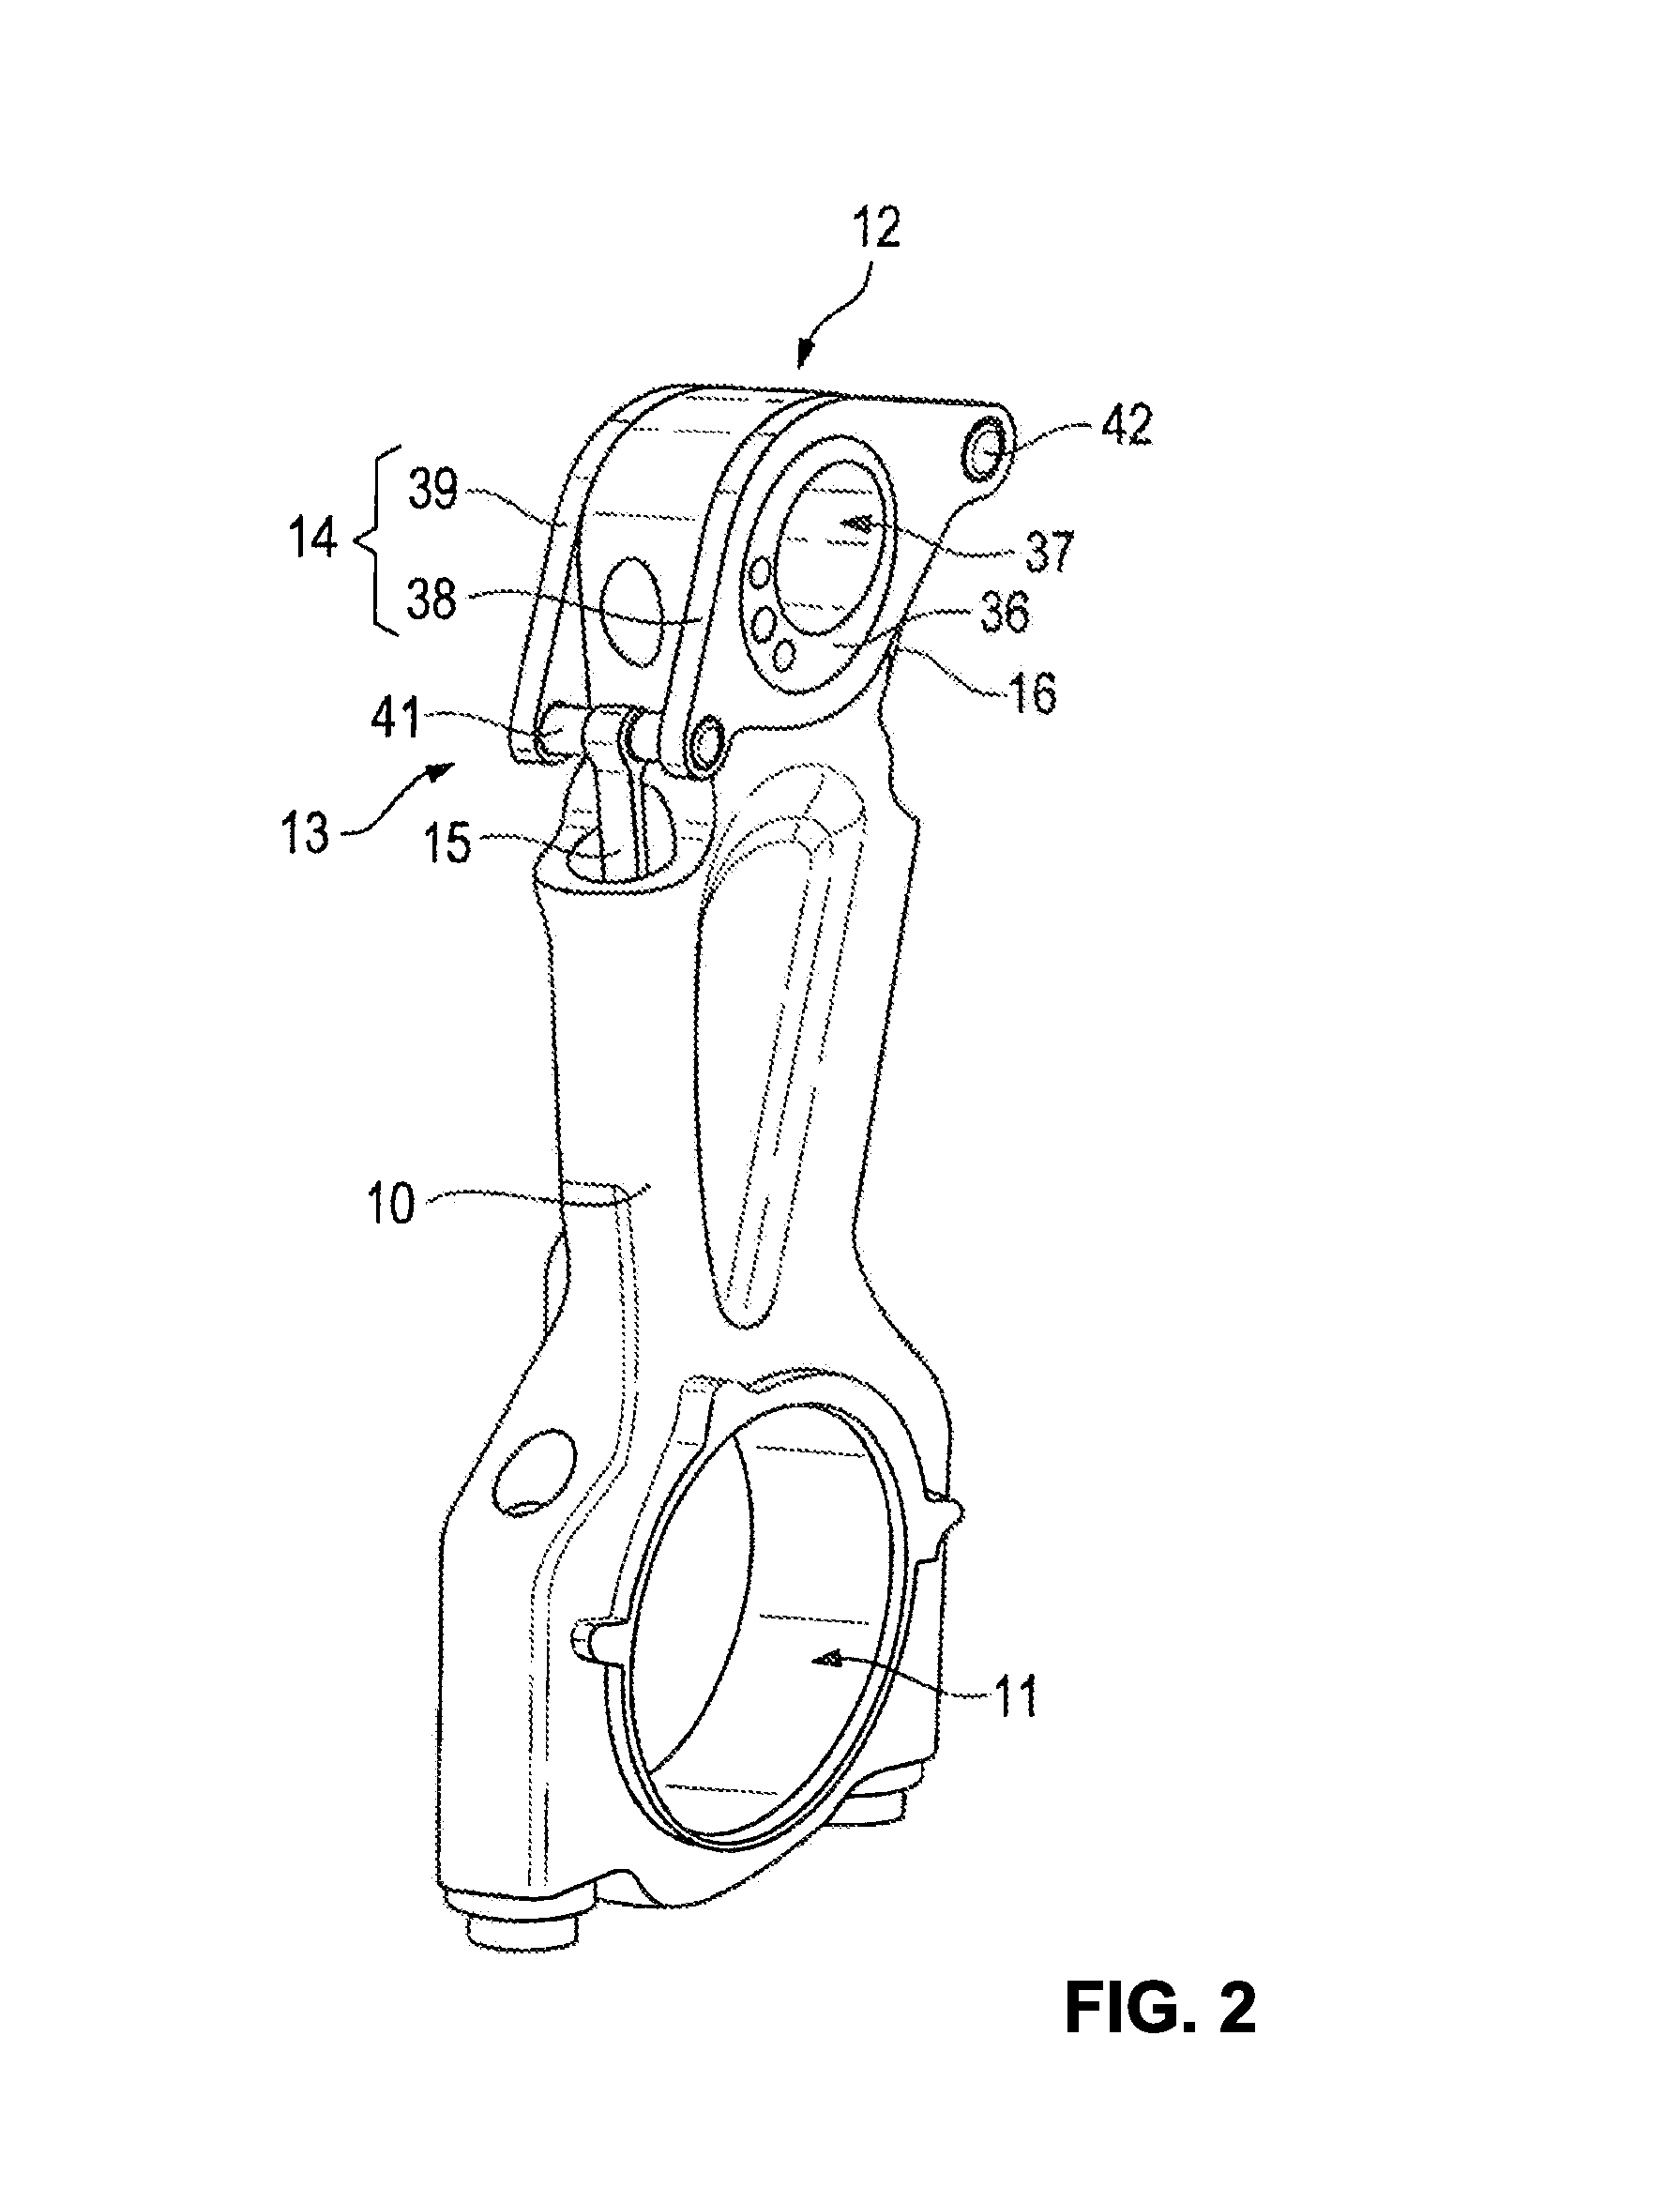 Internal combustion engine and connecting rod